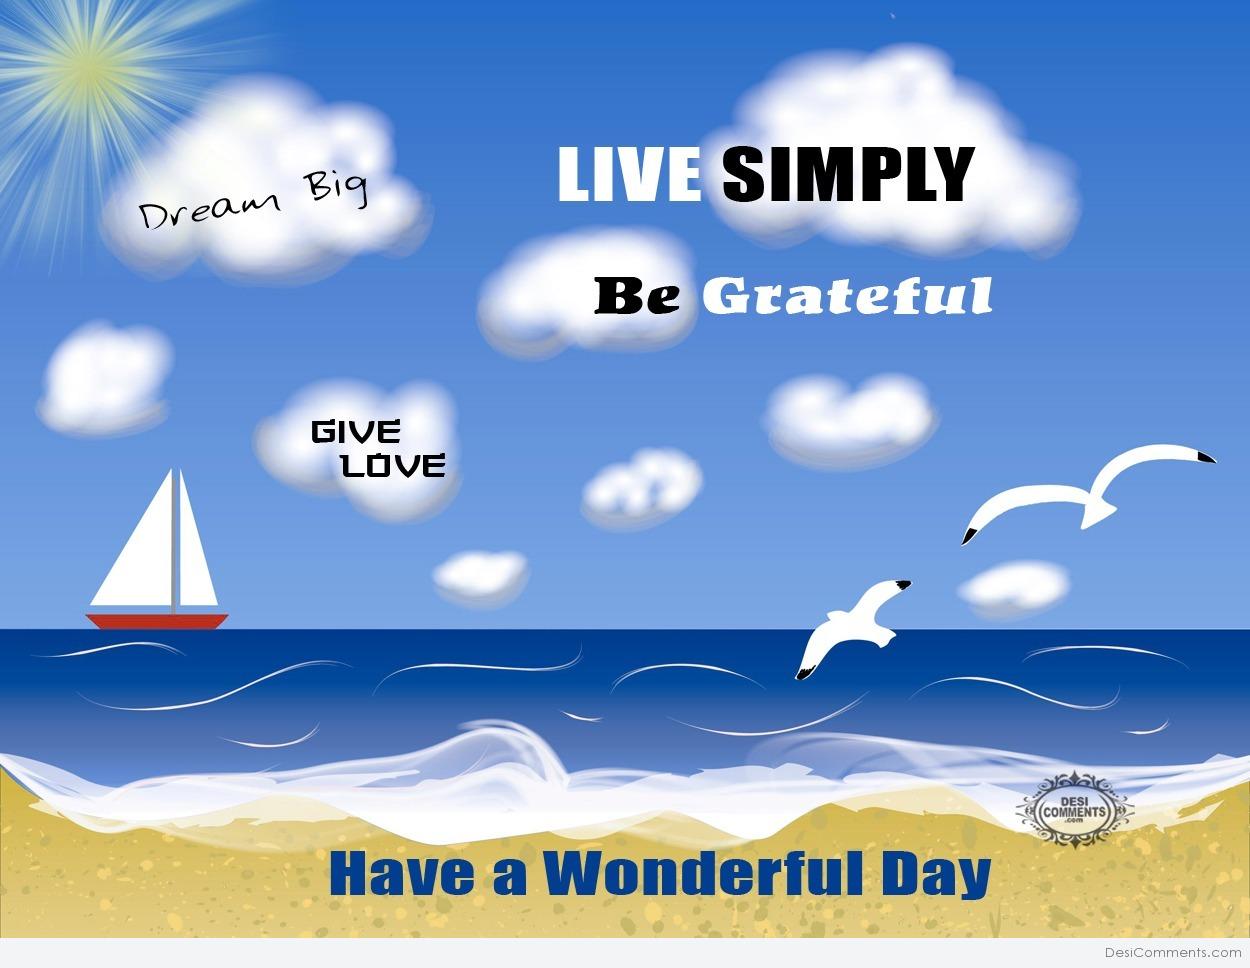 Have a wonderful day - Dream big, live simply.